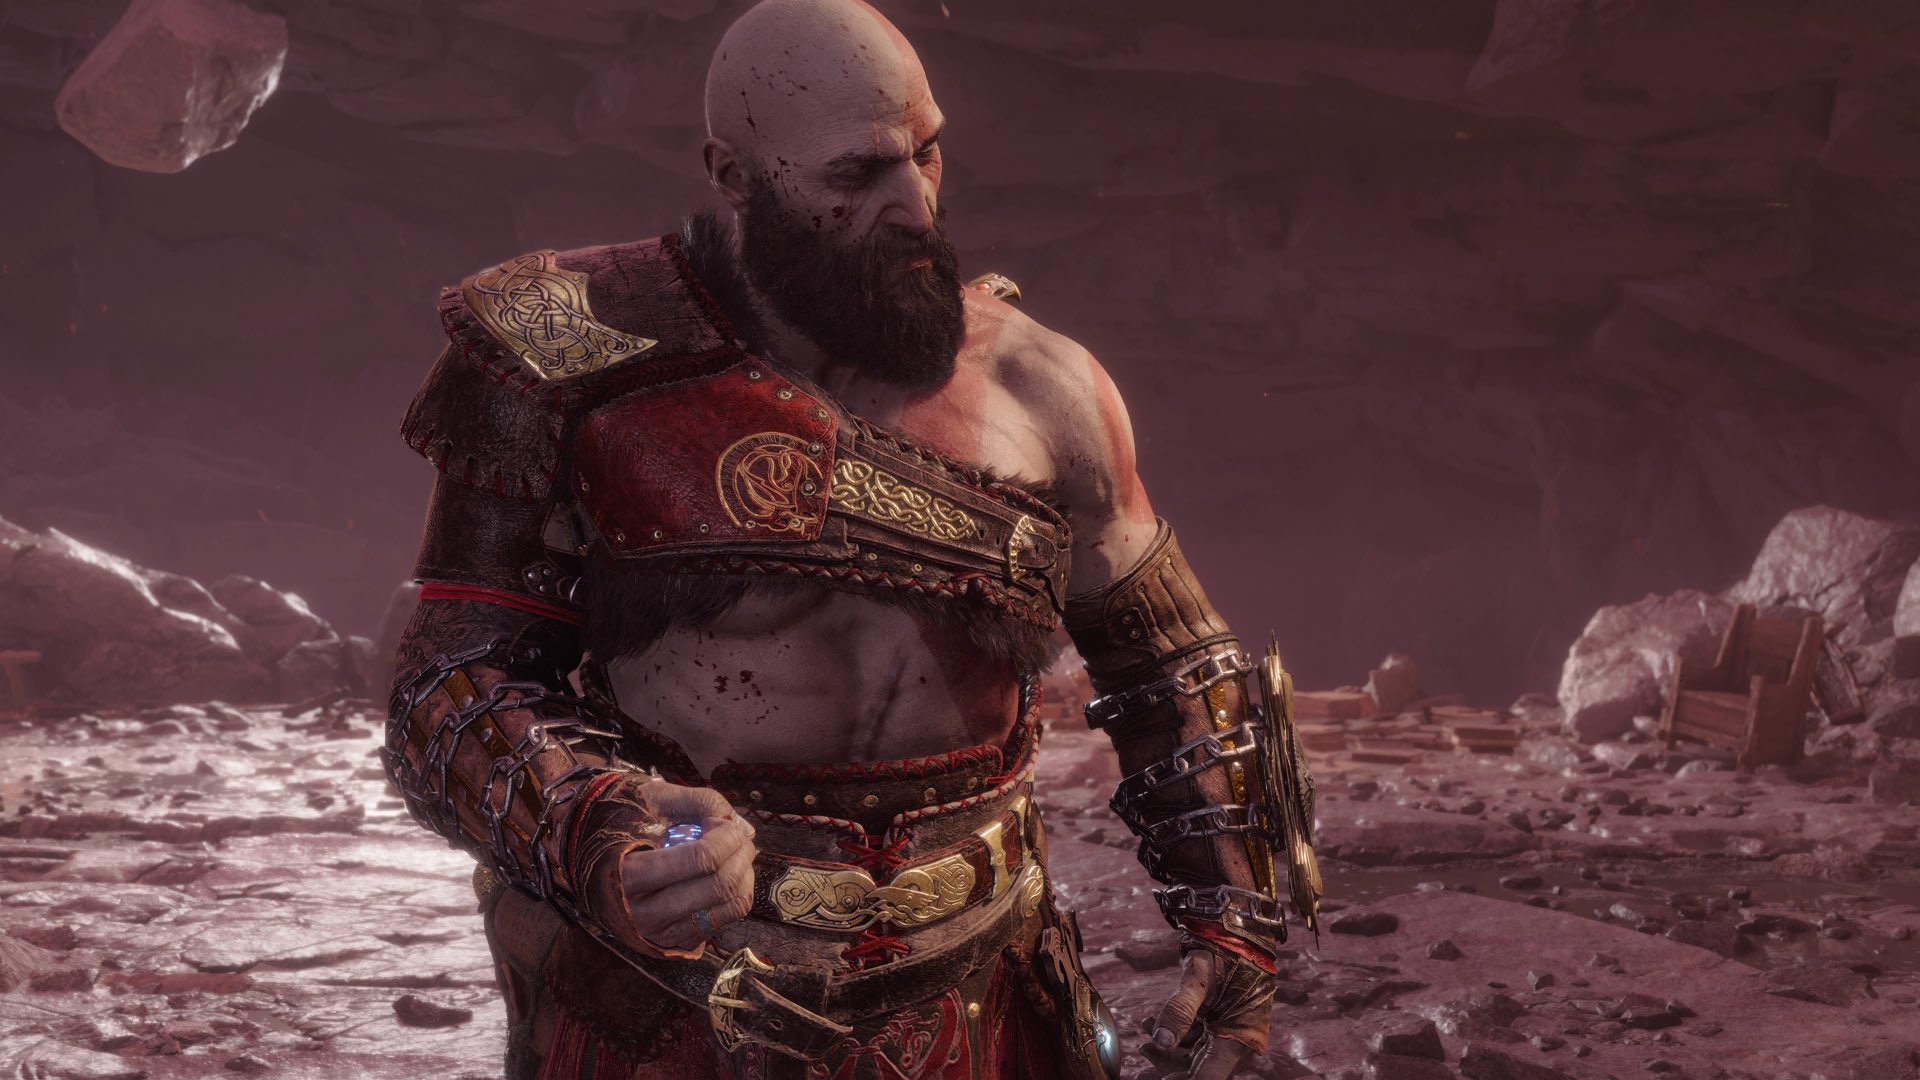 Kratos stands somberly as Asgard falls to ruin around him in the end of God of War Ragnarok.